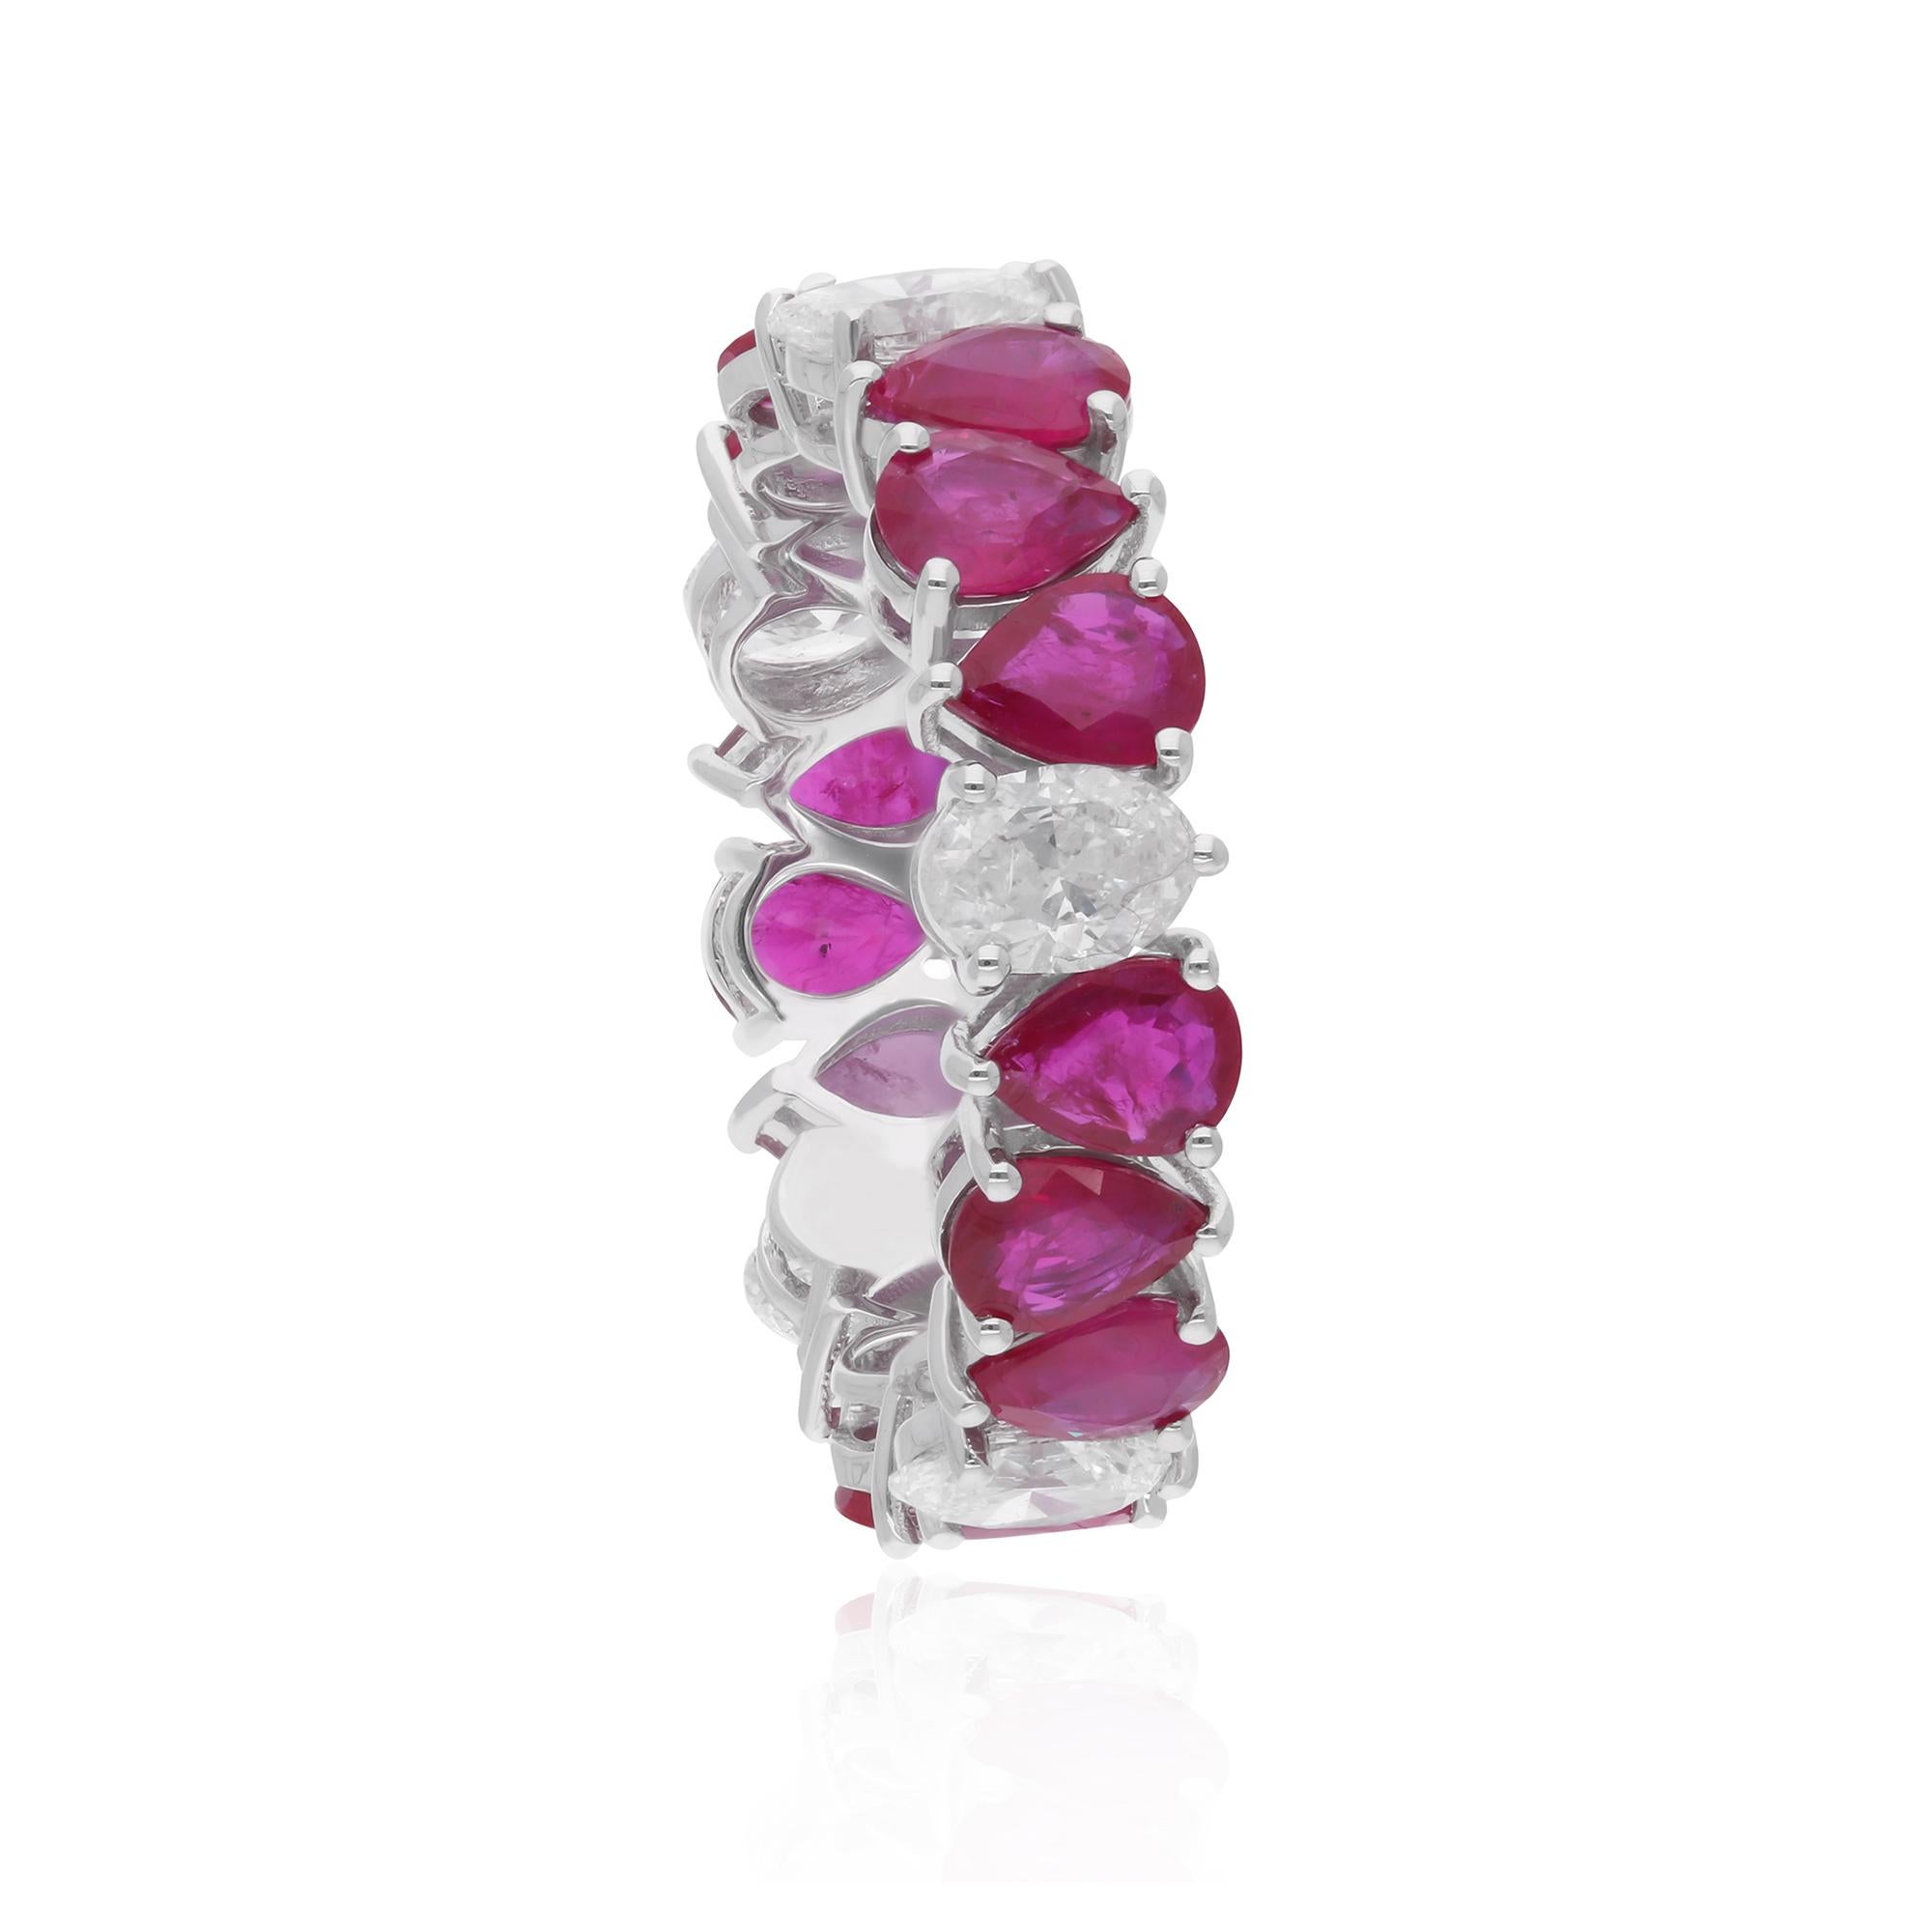 Surrounding the rubies are shimmering oval diamonds, expertly set in a pave or prong setting to maximize their brilliance and fire. With their sparkling clarity and HI color, these diamonds add a touch of glamour and luxury to the ring, creating a